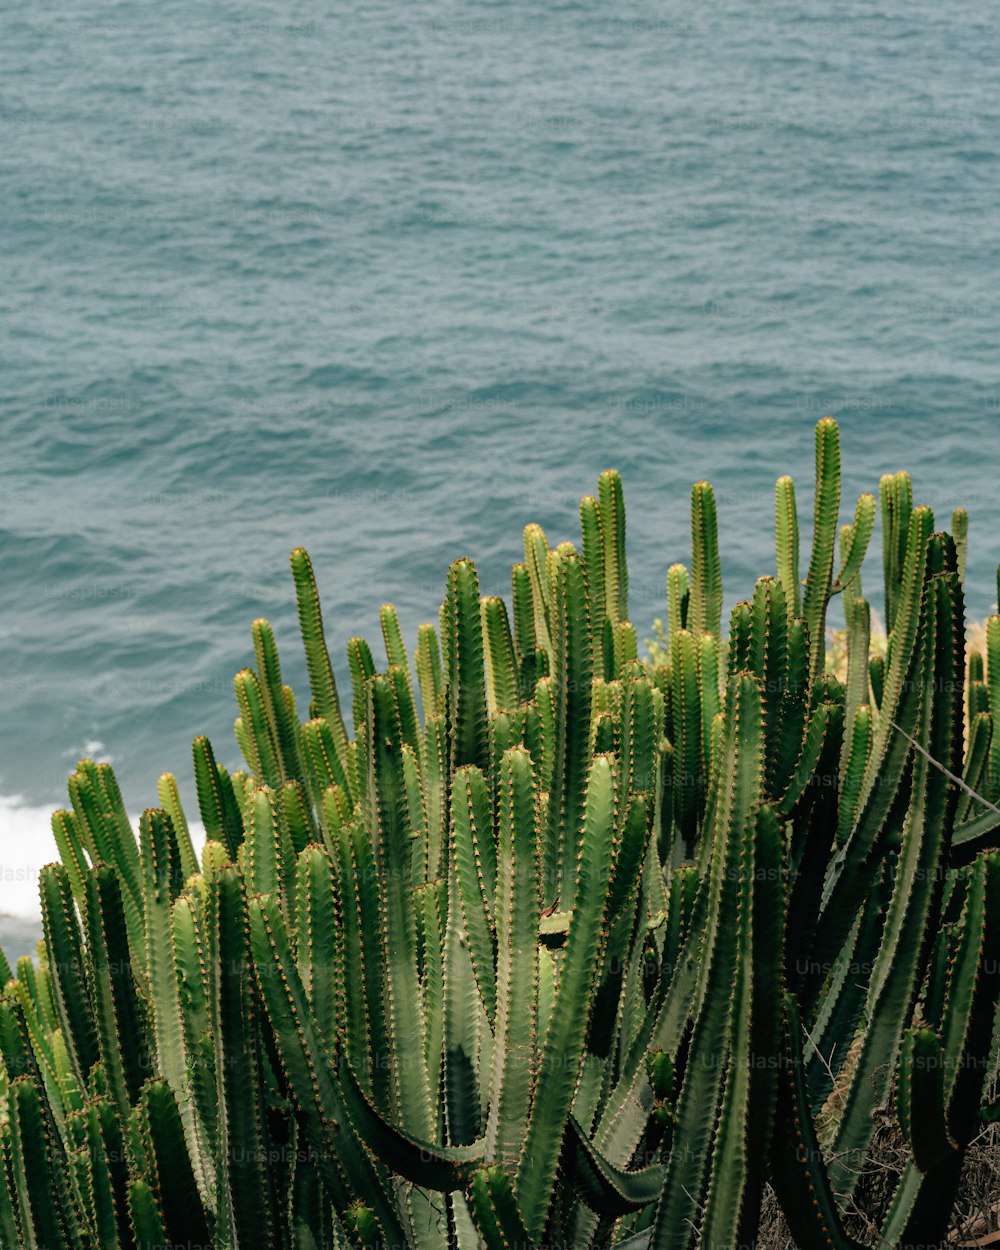 a bunch of cactus plants next to a body of water